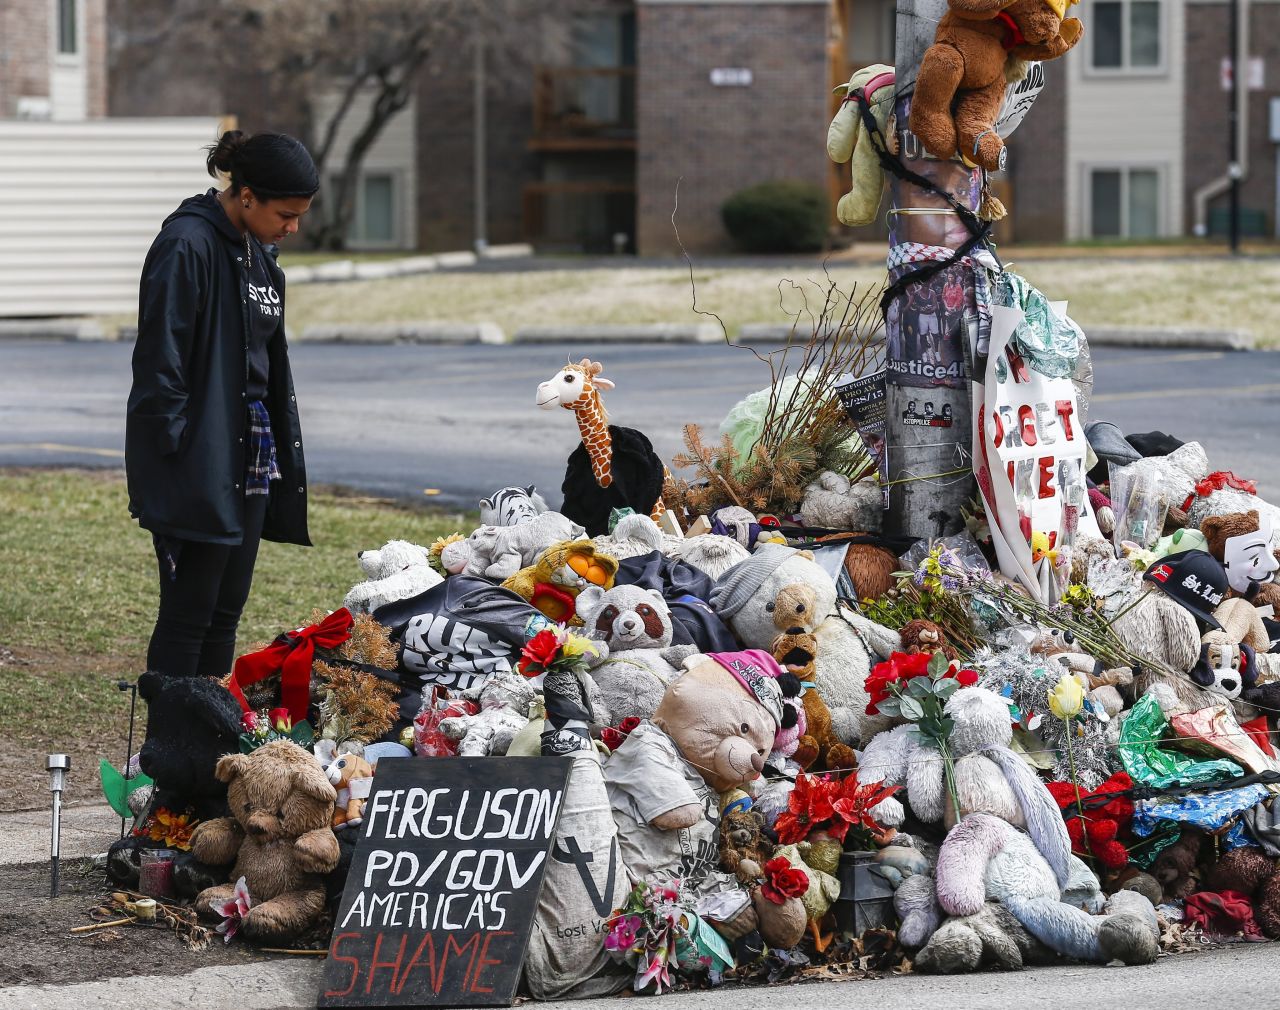 Suzanne Del Rosario pauses as she visits the memorial at the location of the shooting death of Michael Brown in Ferguson, Missouri, on March 15.